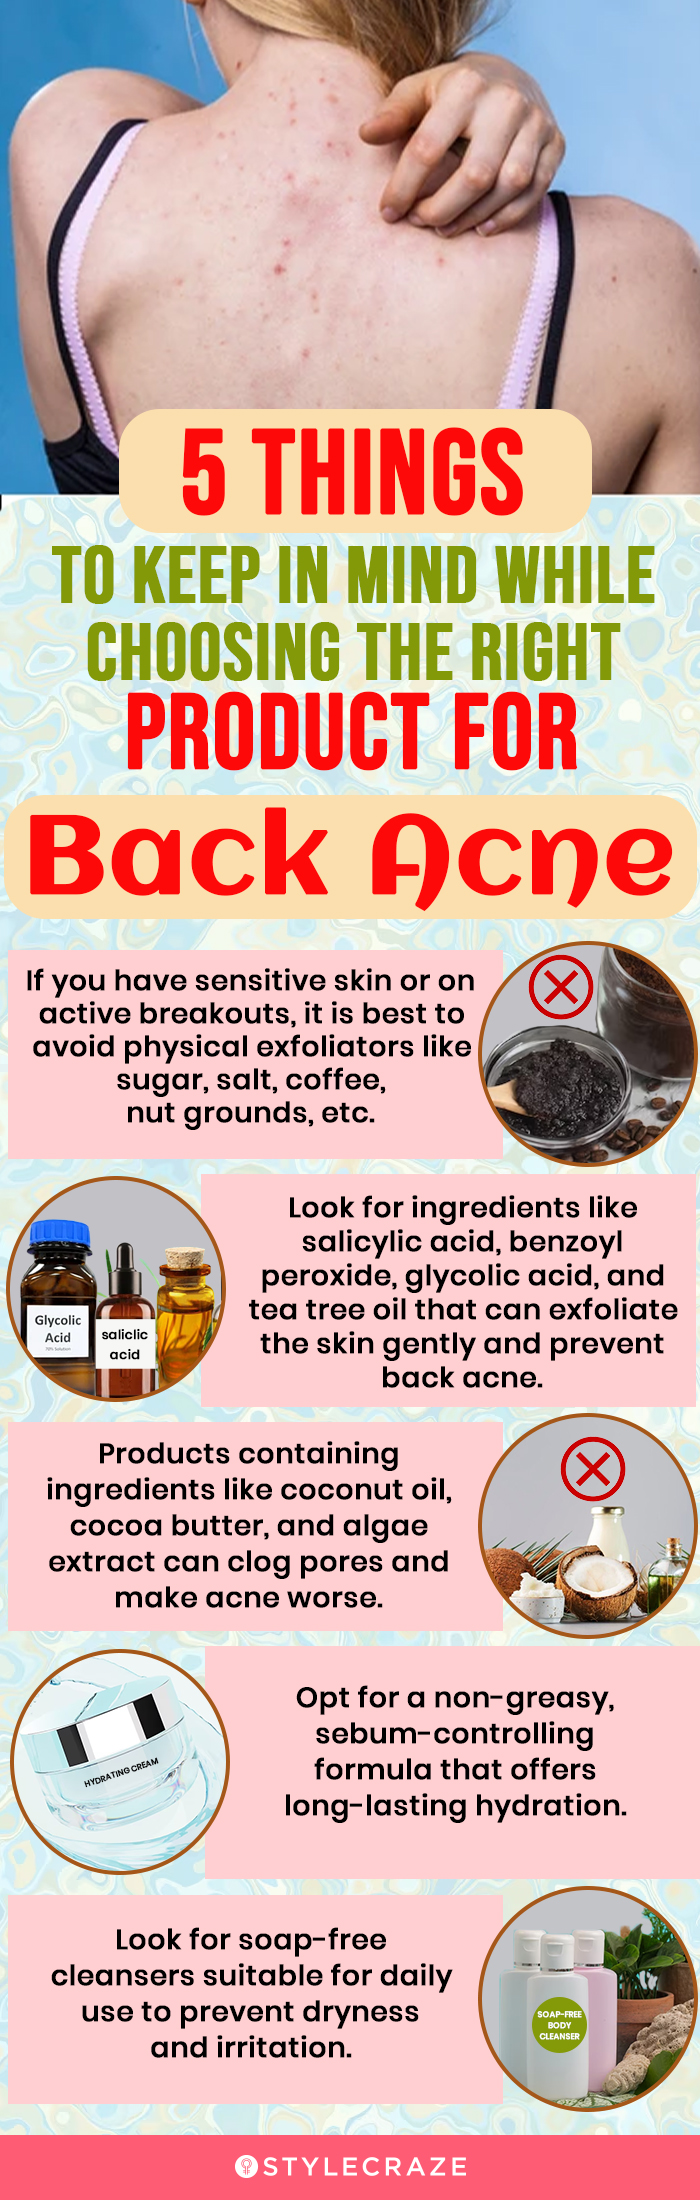 Points To Keep In Mind To Choose The Right Product For Back Acne (infographic)